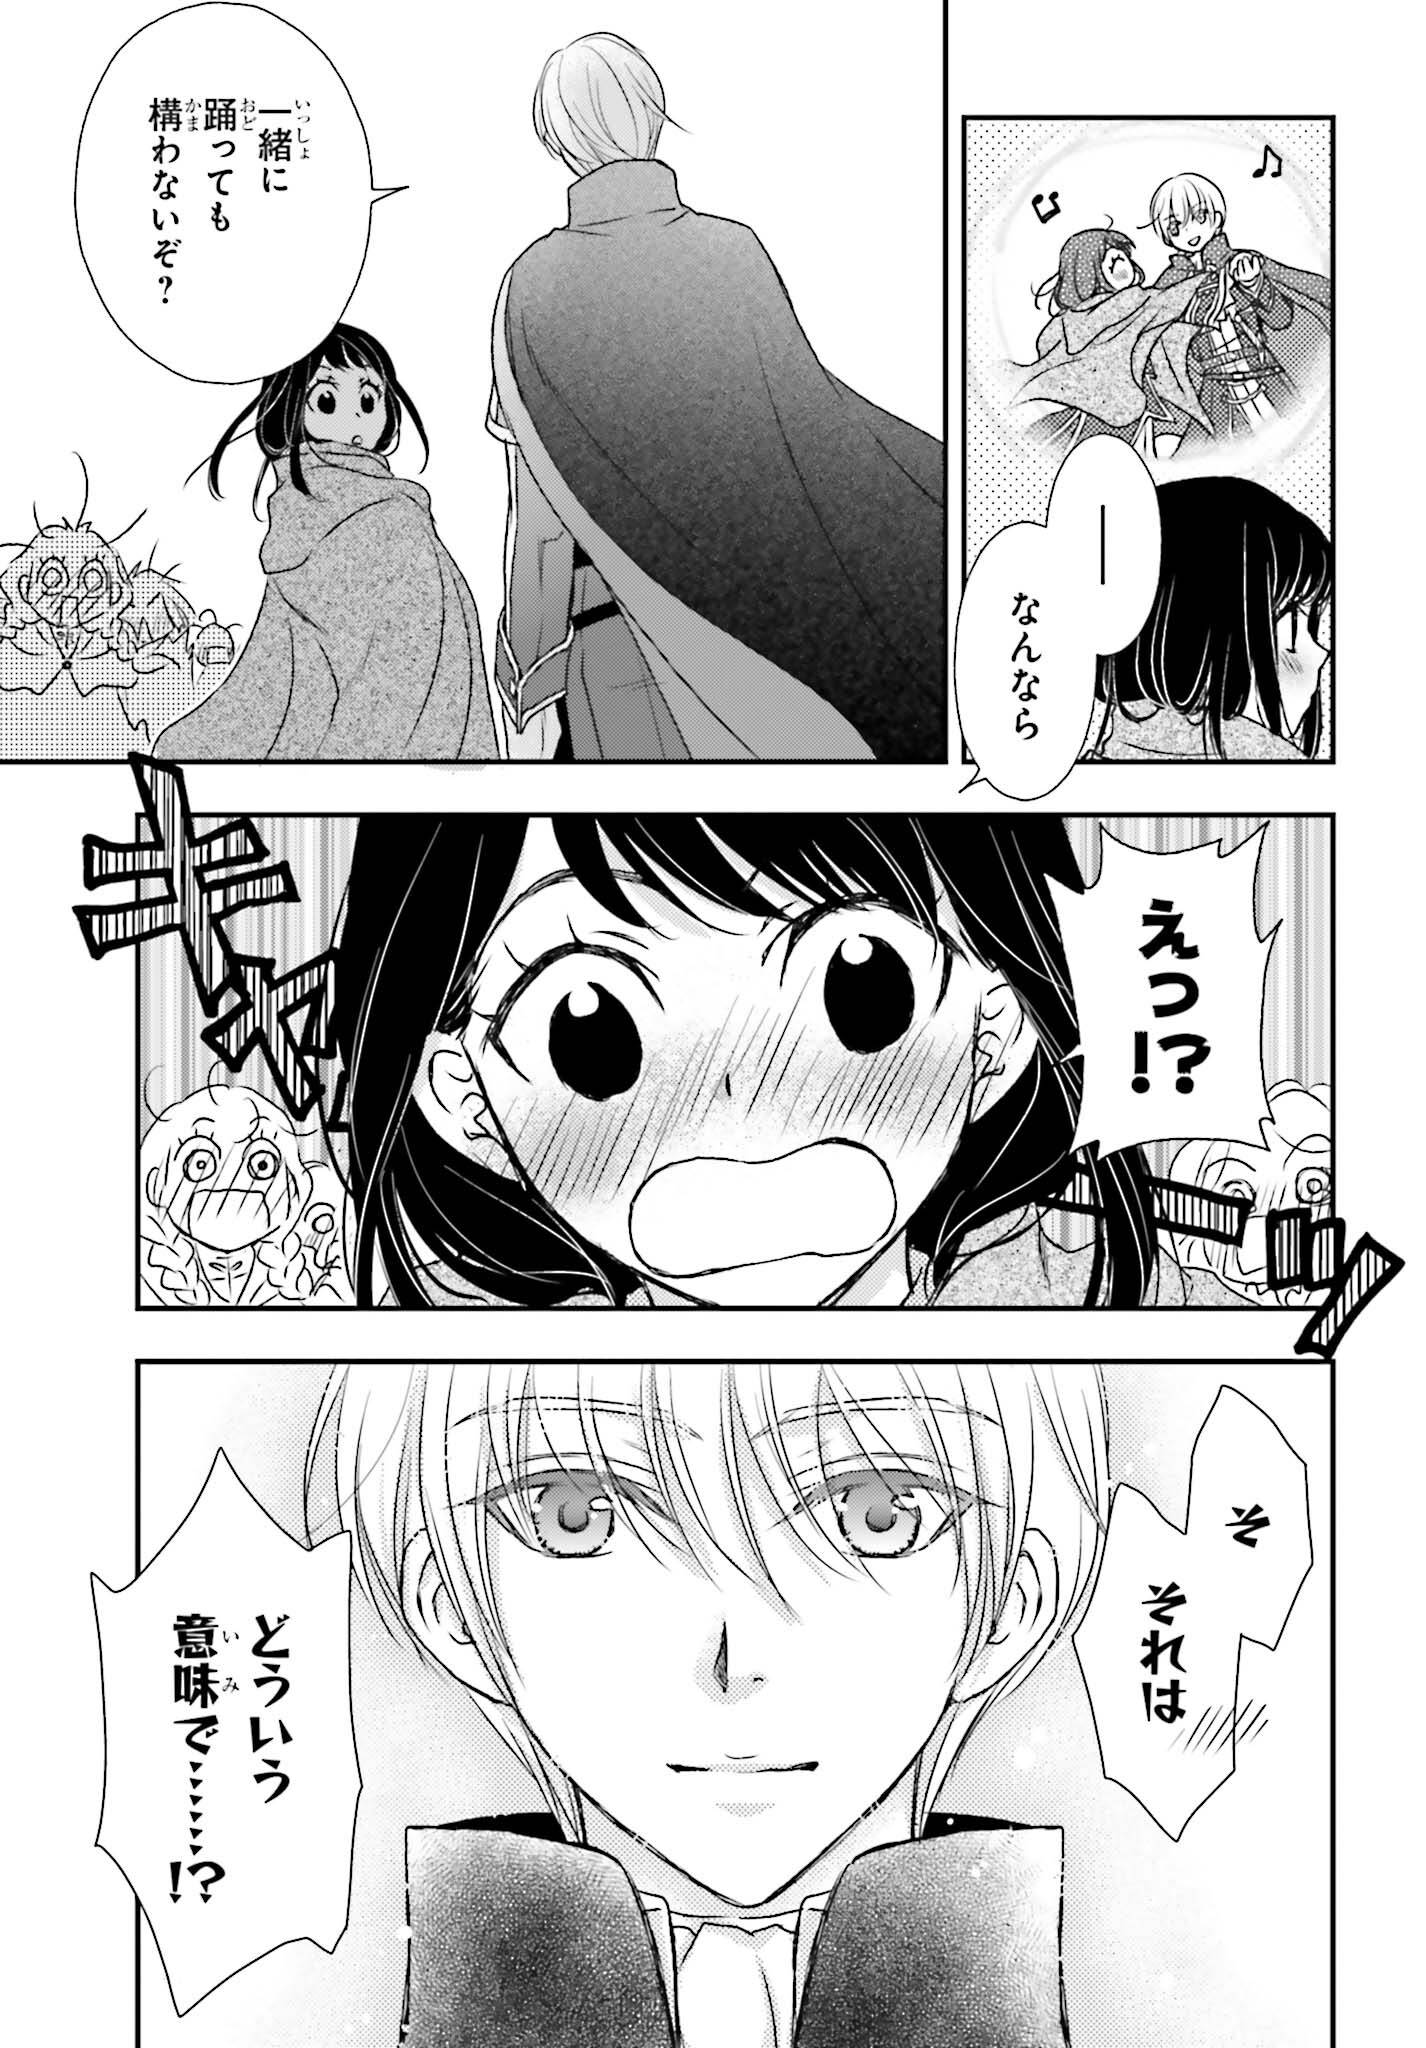 The Little Girl Raised by Death Hold the Sword of Death Tight - Chapter 41 - Page 3